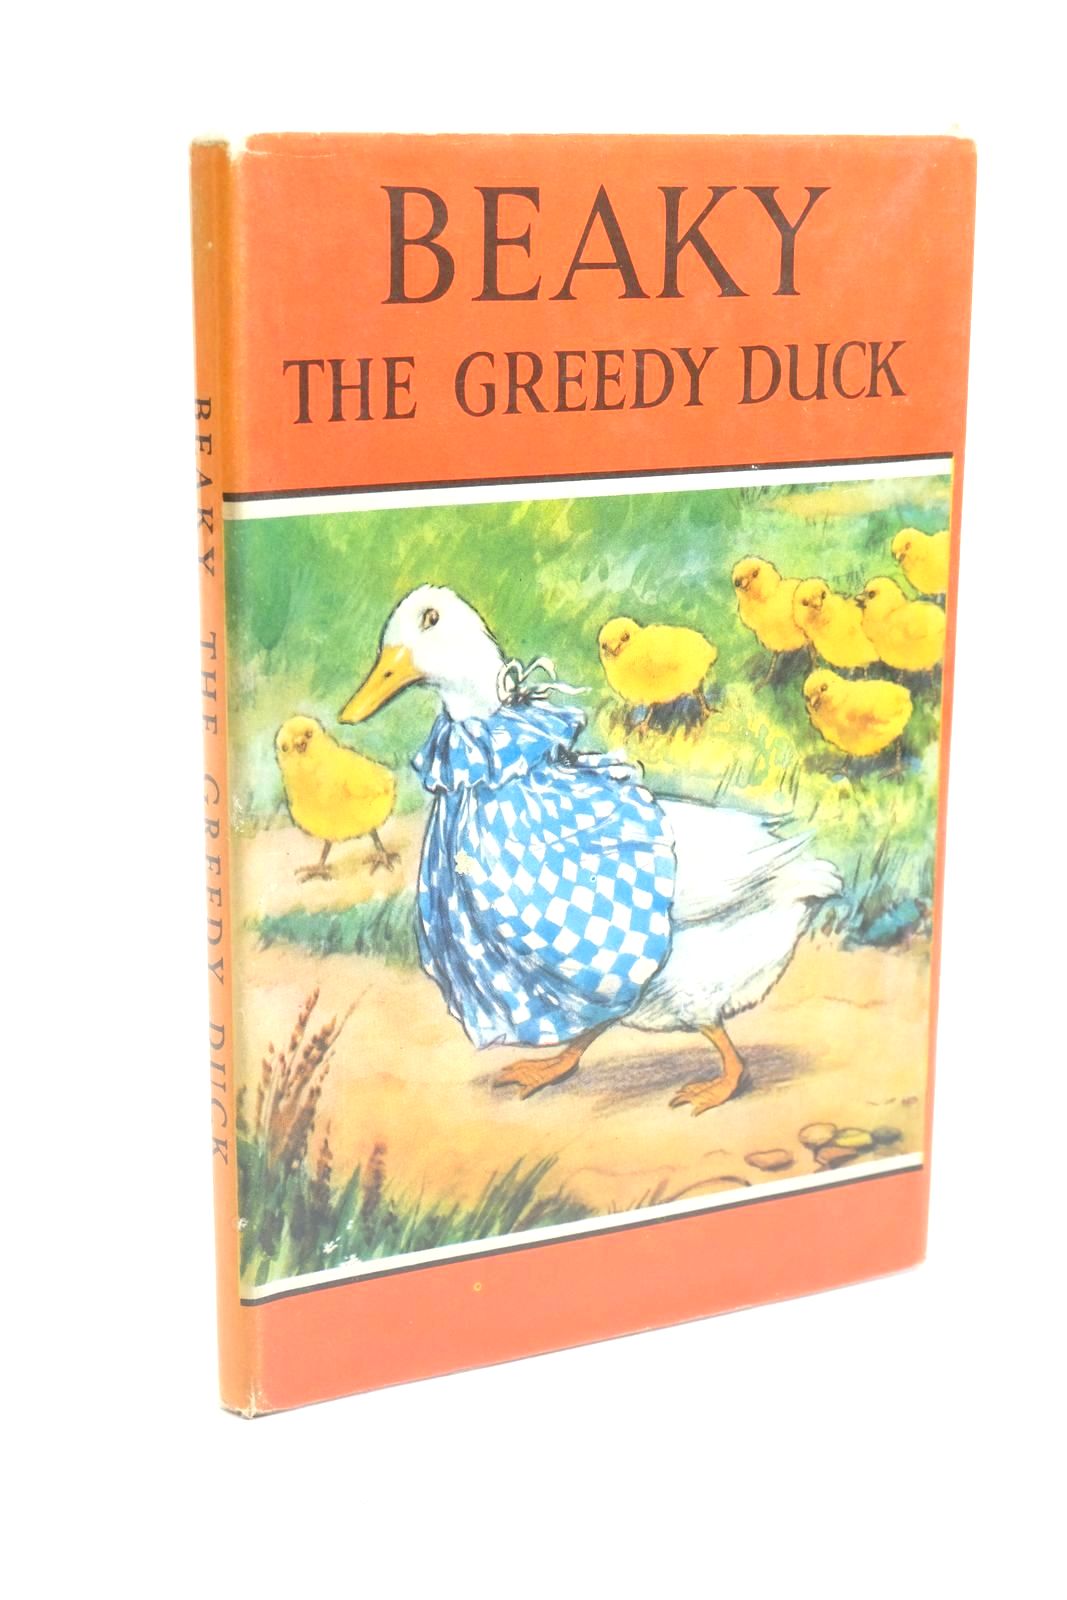 Photo of BEAKY THE GREEDY DUCK written by Barr, Noel illustrated by Hickling, P.B. published by Wills & Hepworth Ltd. (STOCK CODE: 1322398)  for sale by Stella & Rose's Books